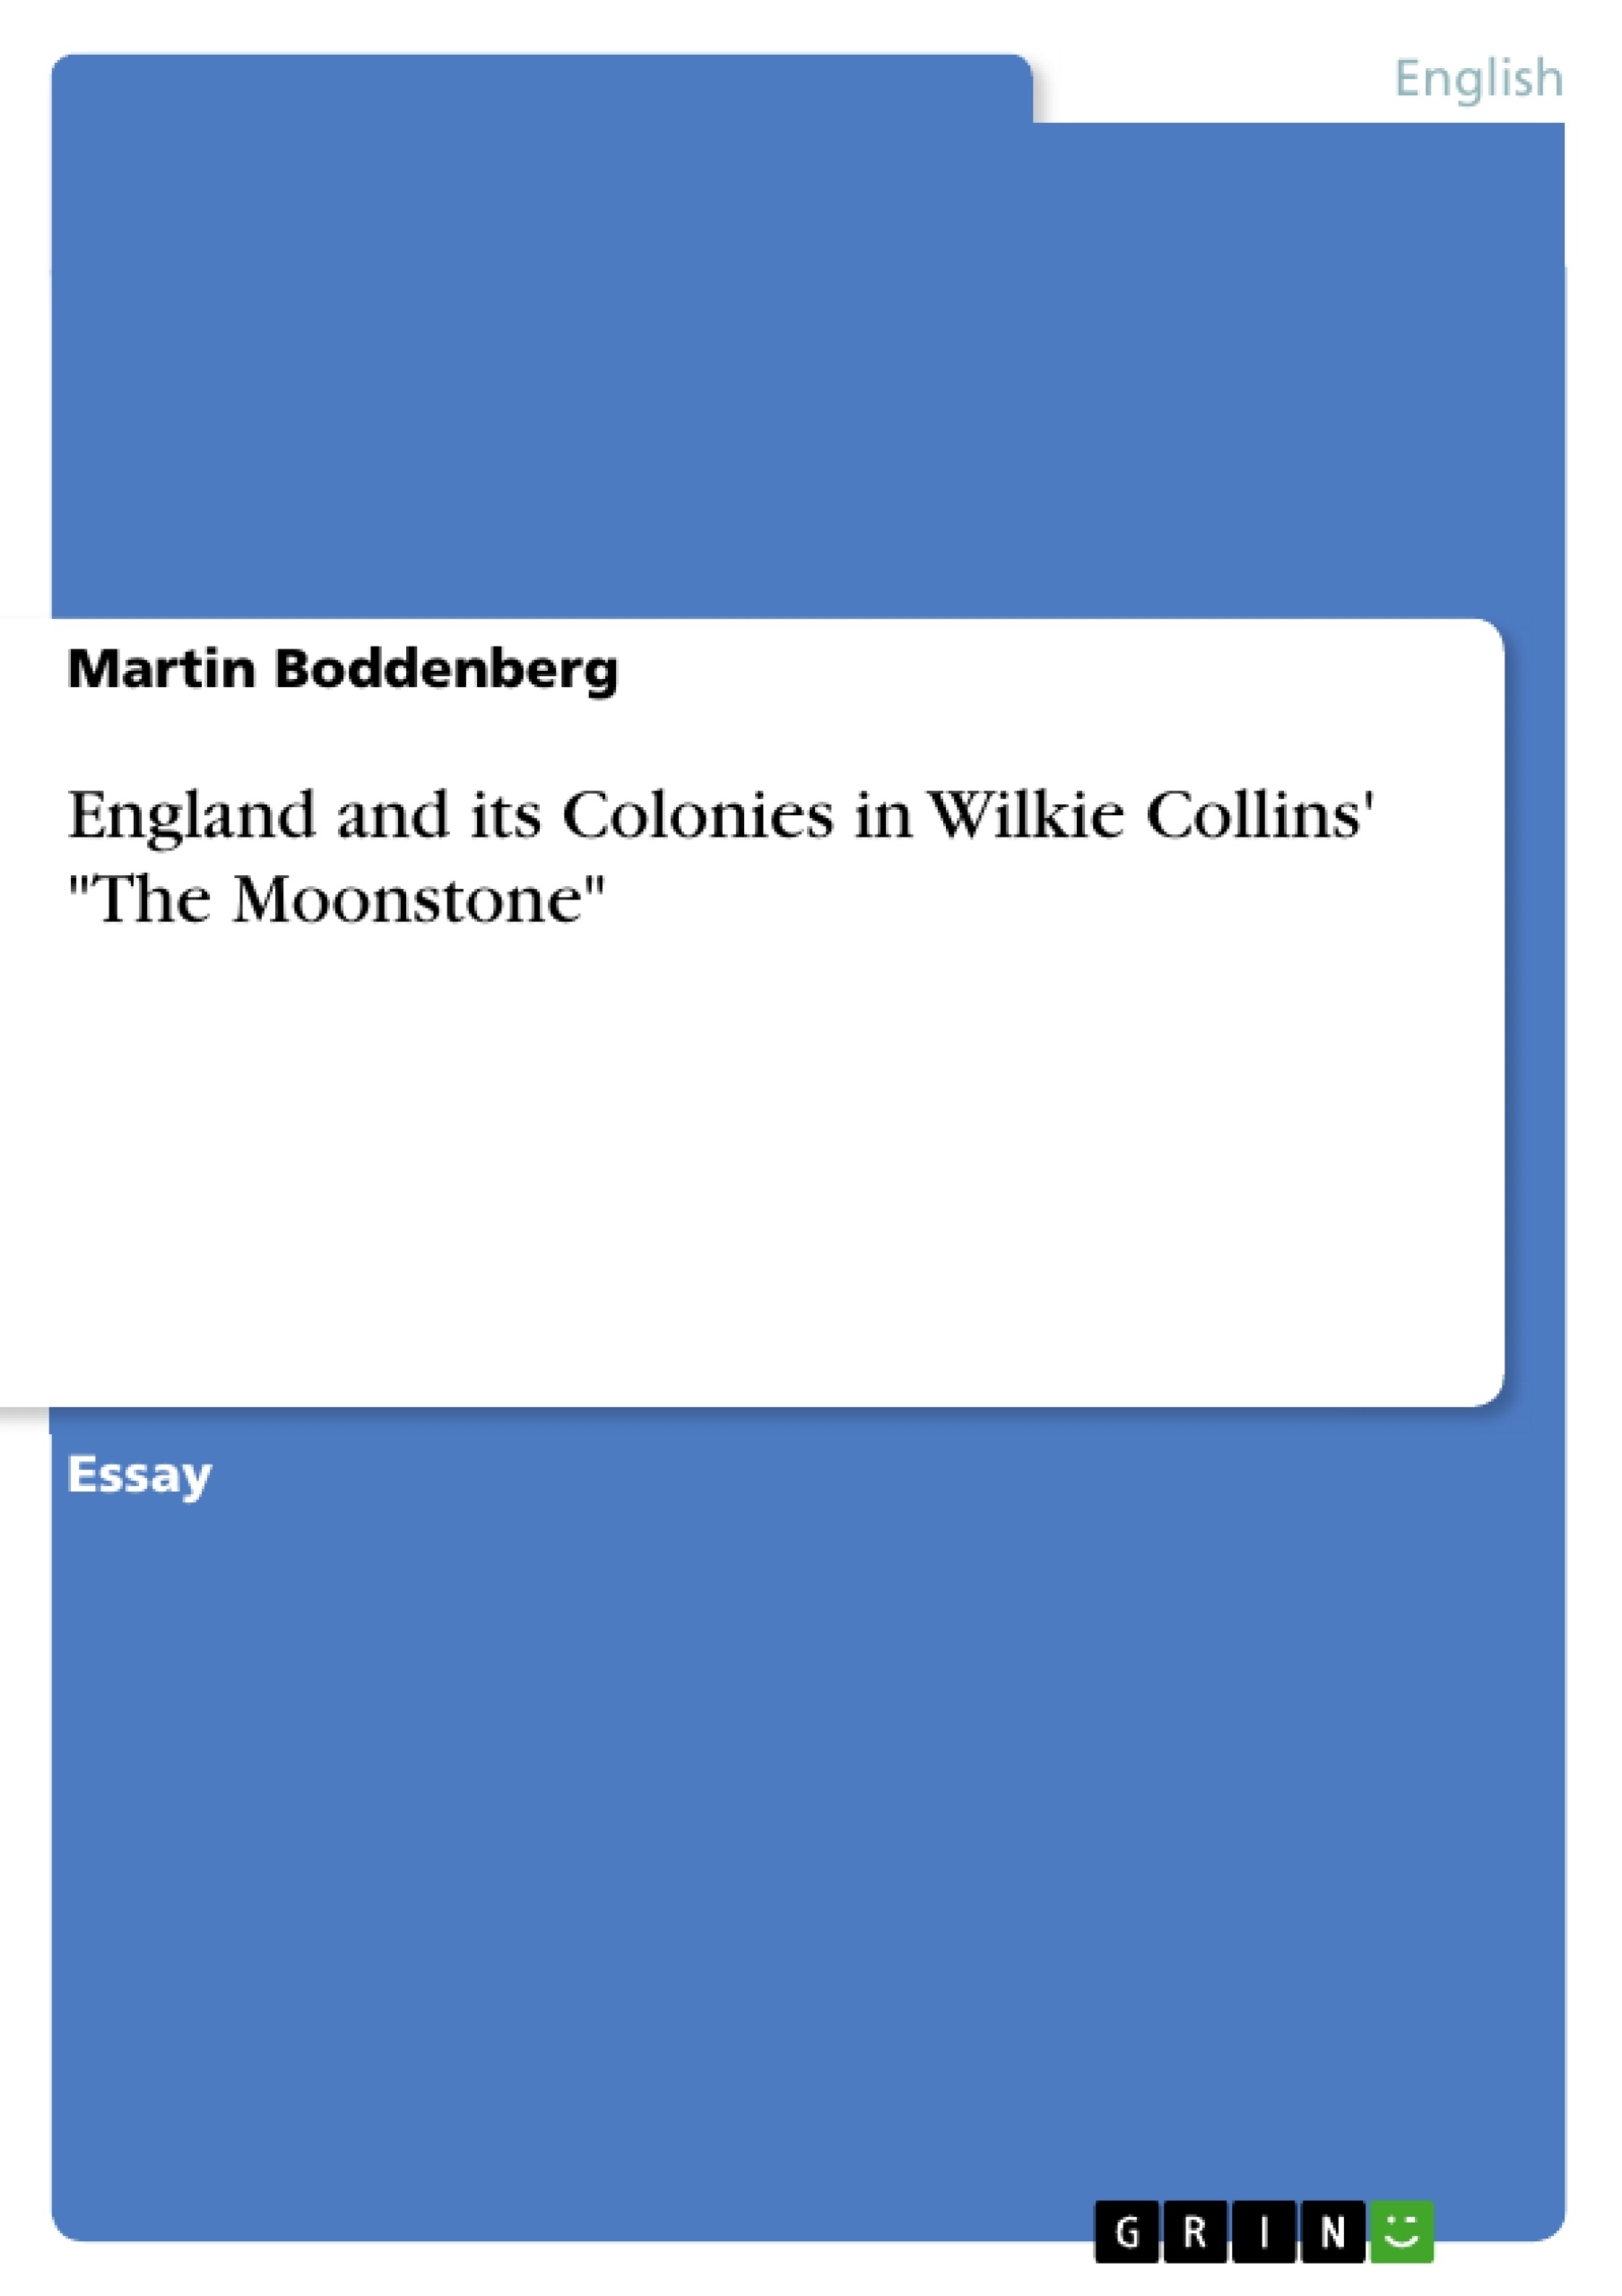 Titel: England and its Colonies in Wilkie Collins' "The Moonstone"